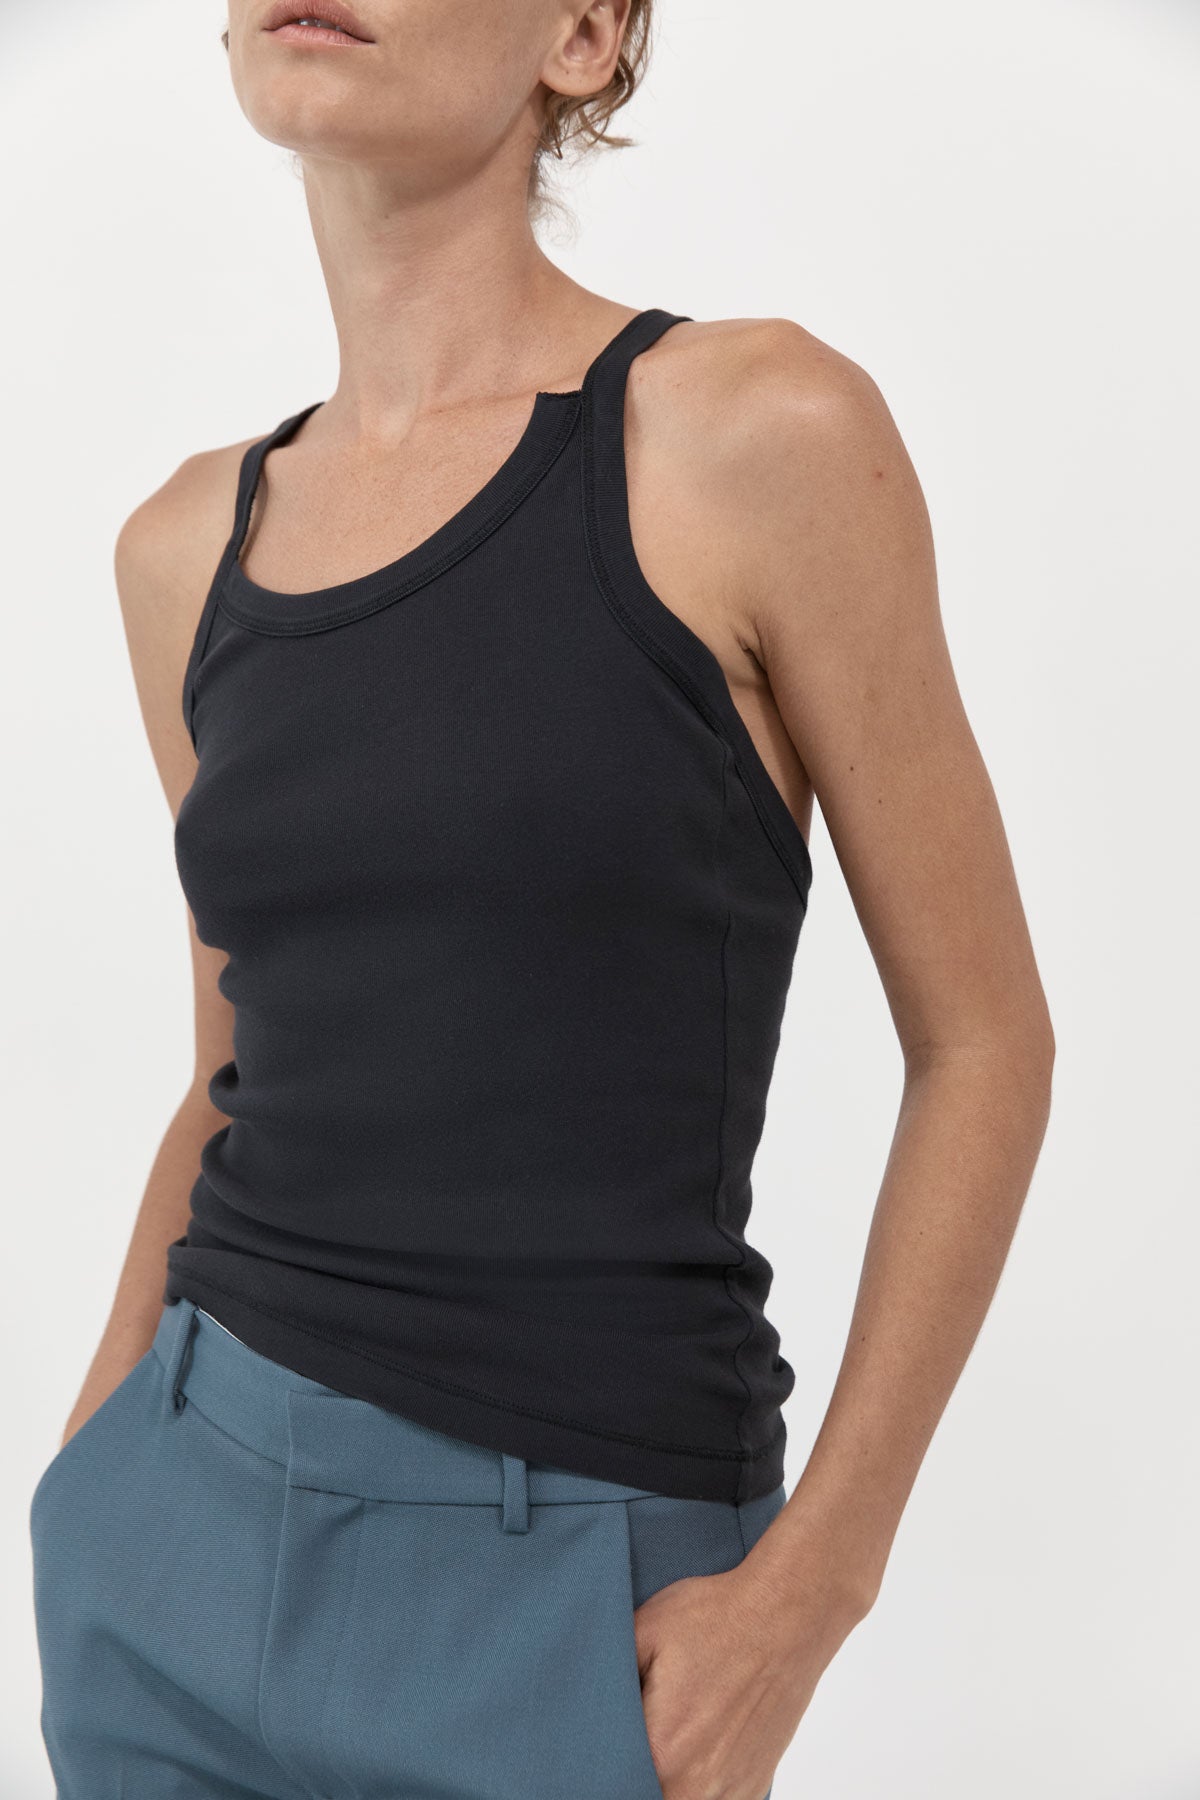 St Agni Organic Cotton Abstract Singlet in Black available at TNT The New Trend Australia